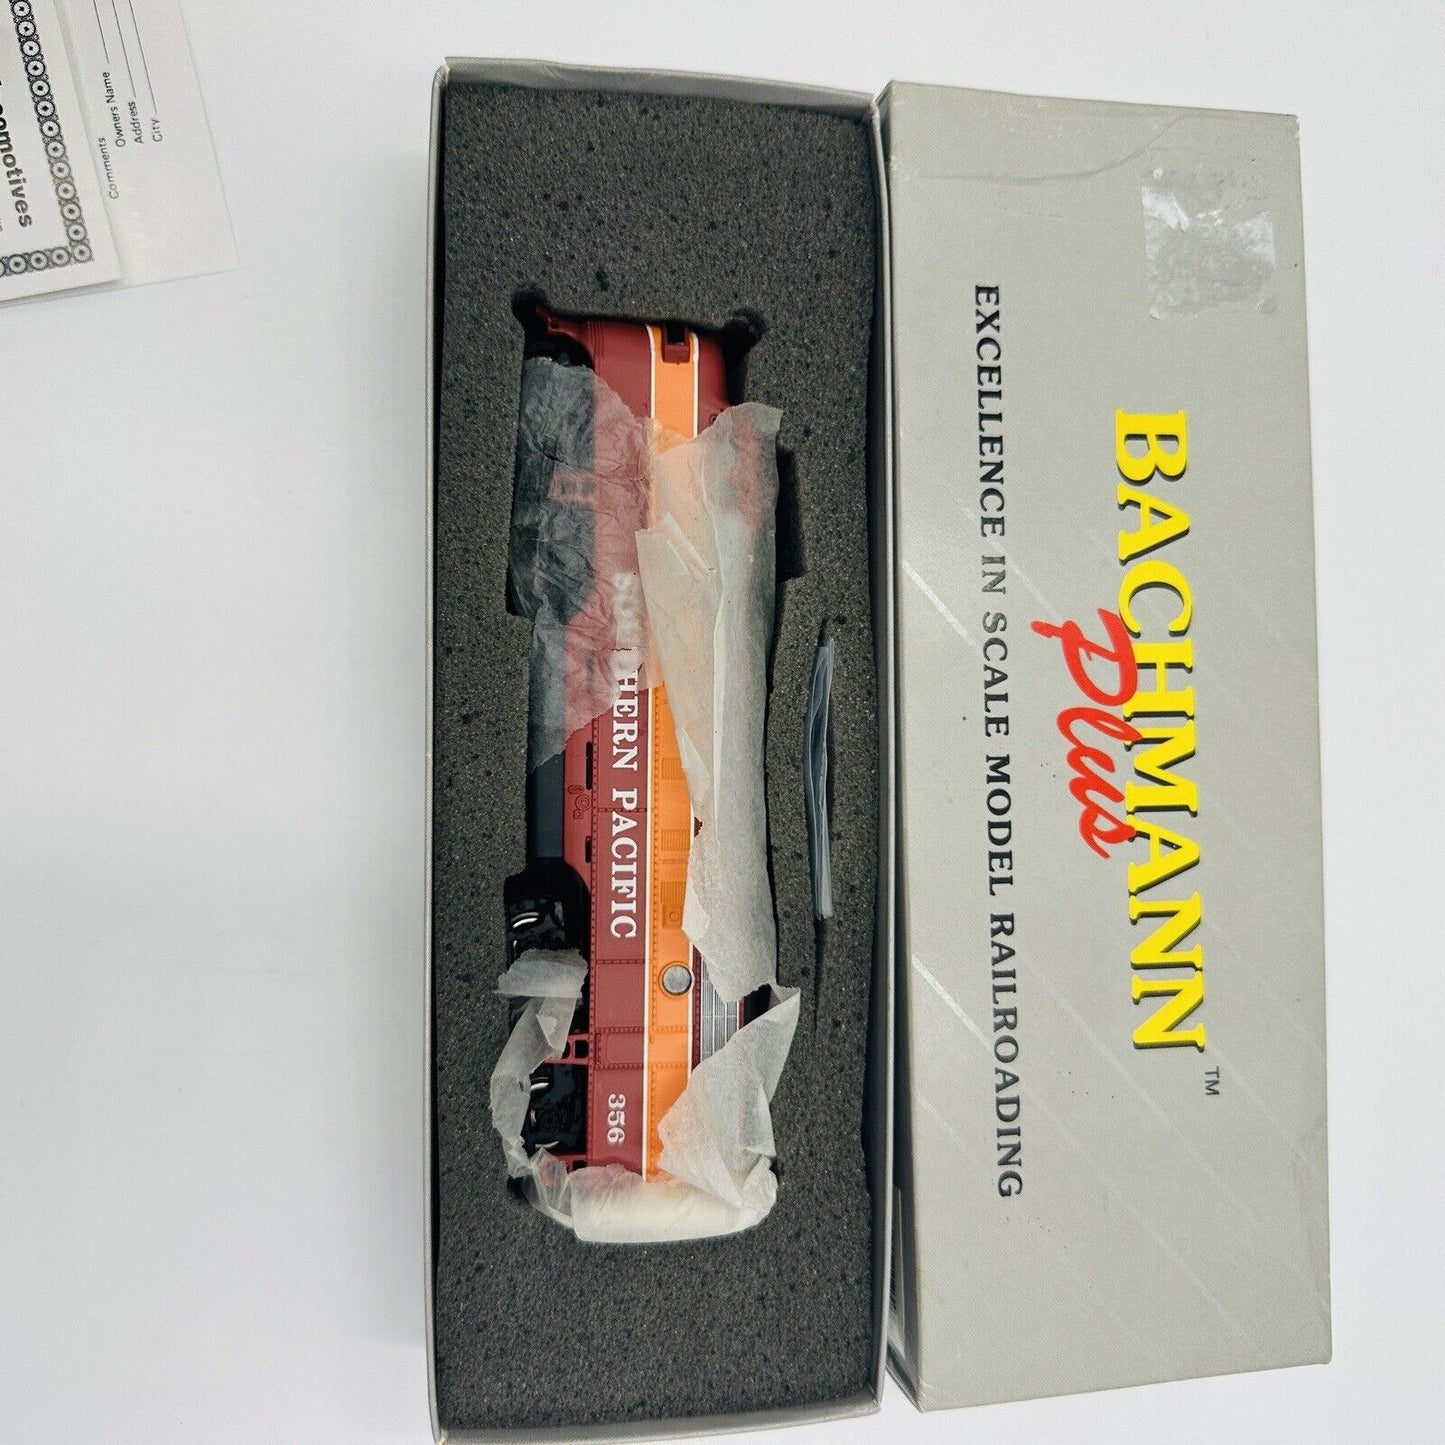 Bachmann Plus HO Southern Pacific F7A Daylight 11235 SP 356 Engine Boxed Train